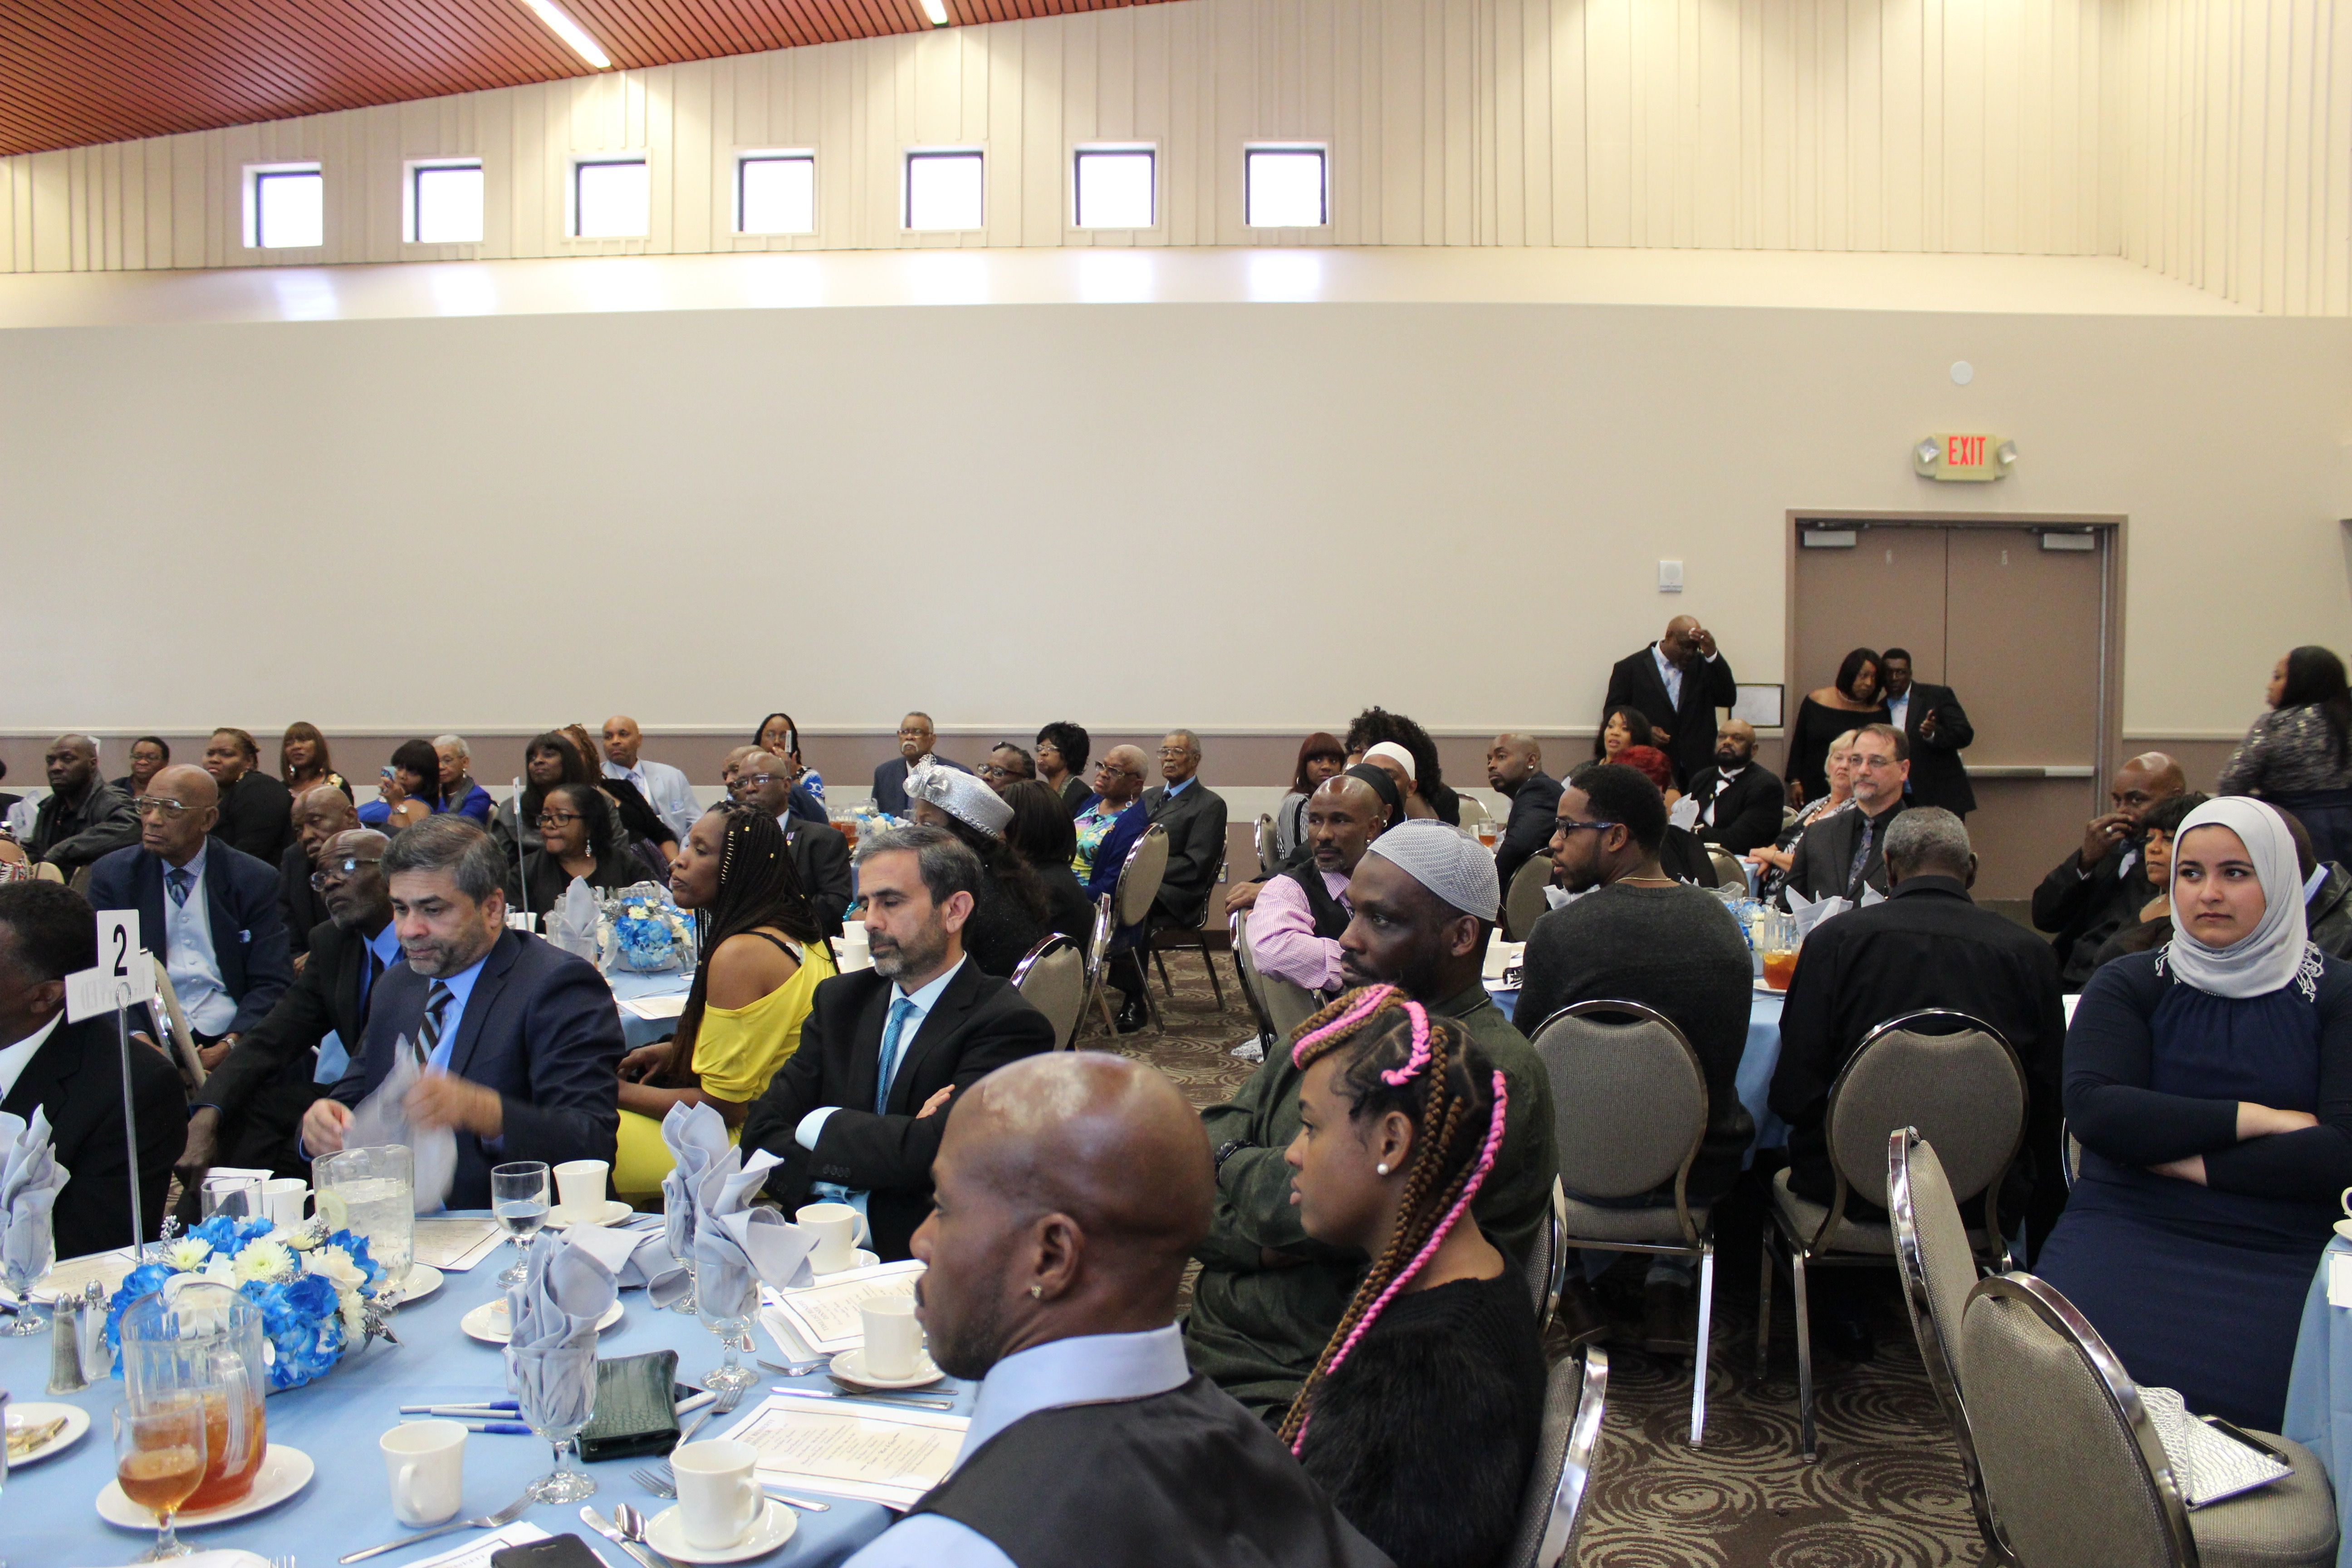 Participants at 1st Annual Dinner